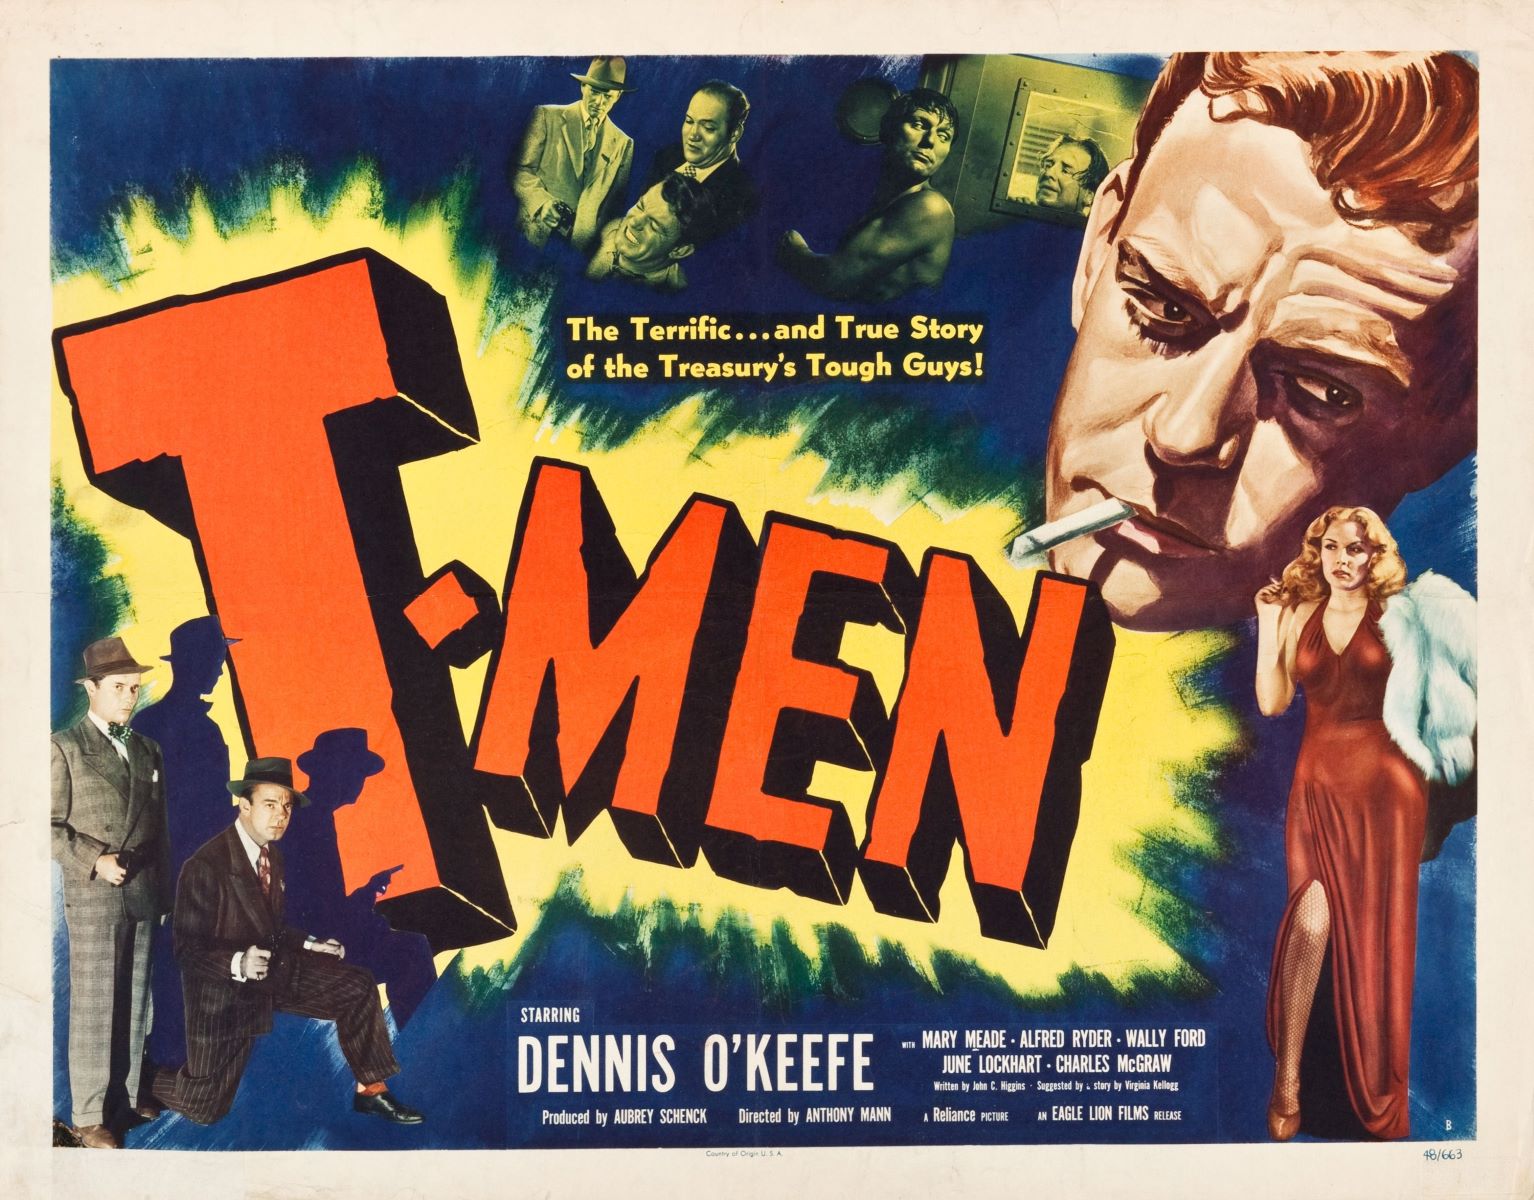 45-facts-about-the-movie-t-men